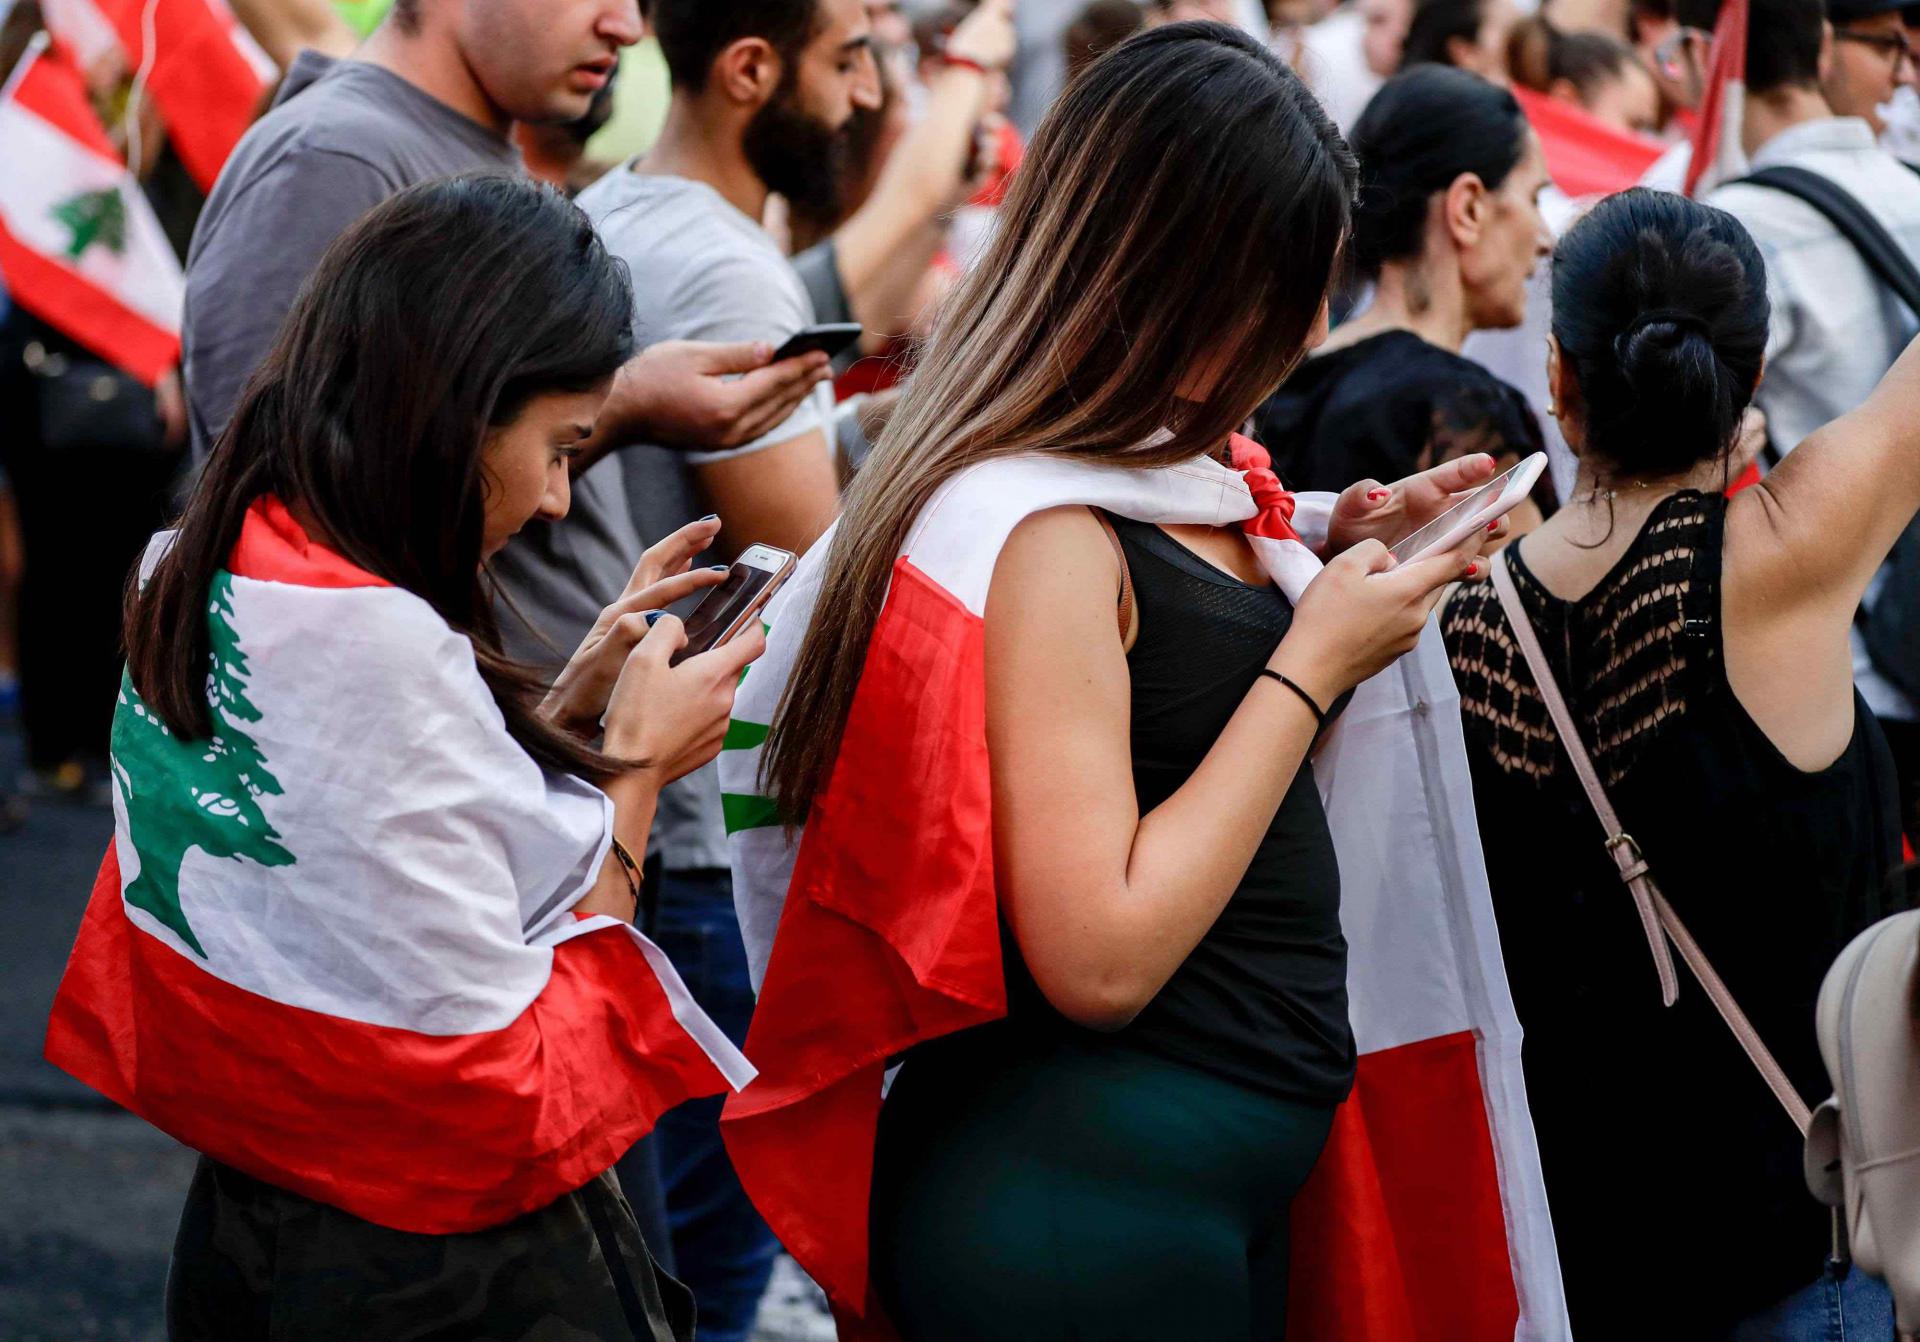 Women draped in the Lebanese national flag use their cell phones during a demonstration against tax increases and official corruption